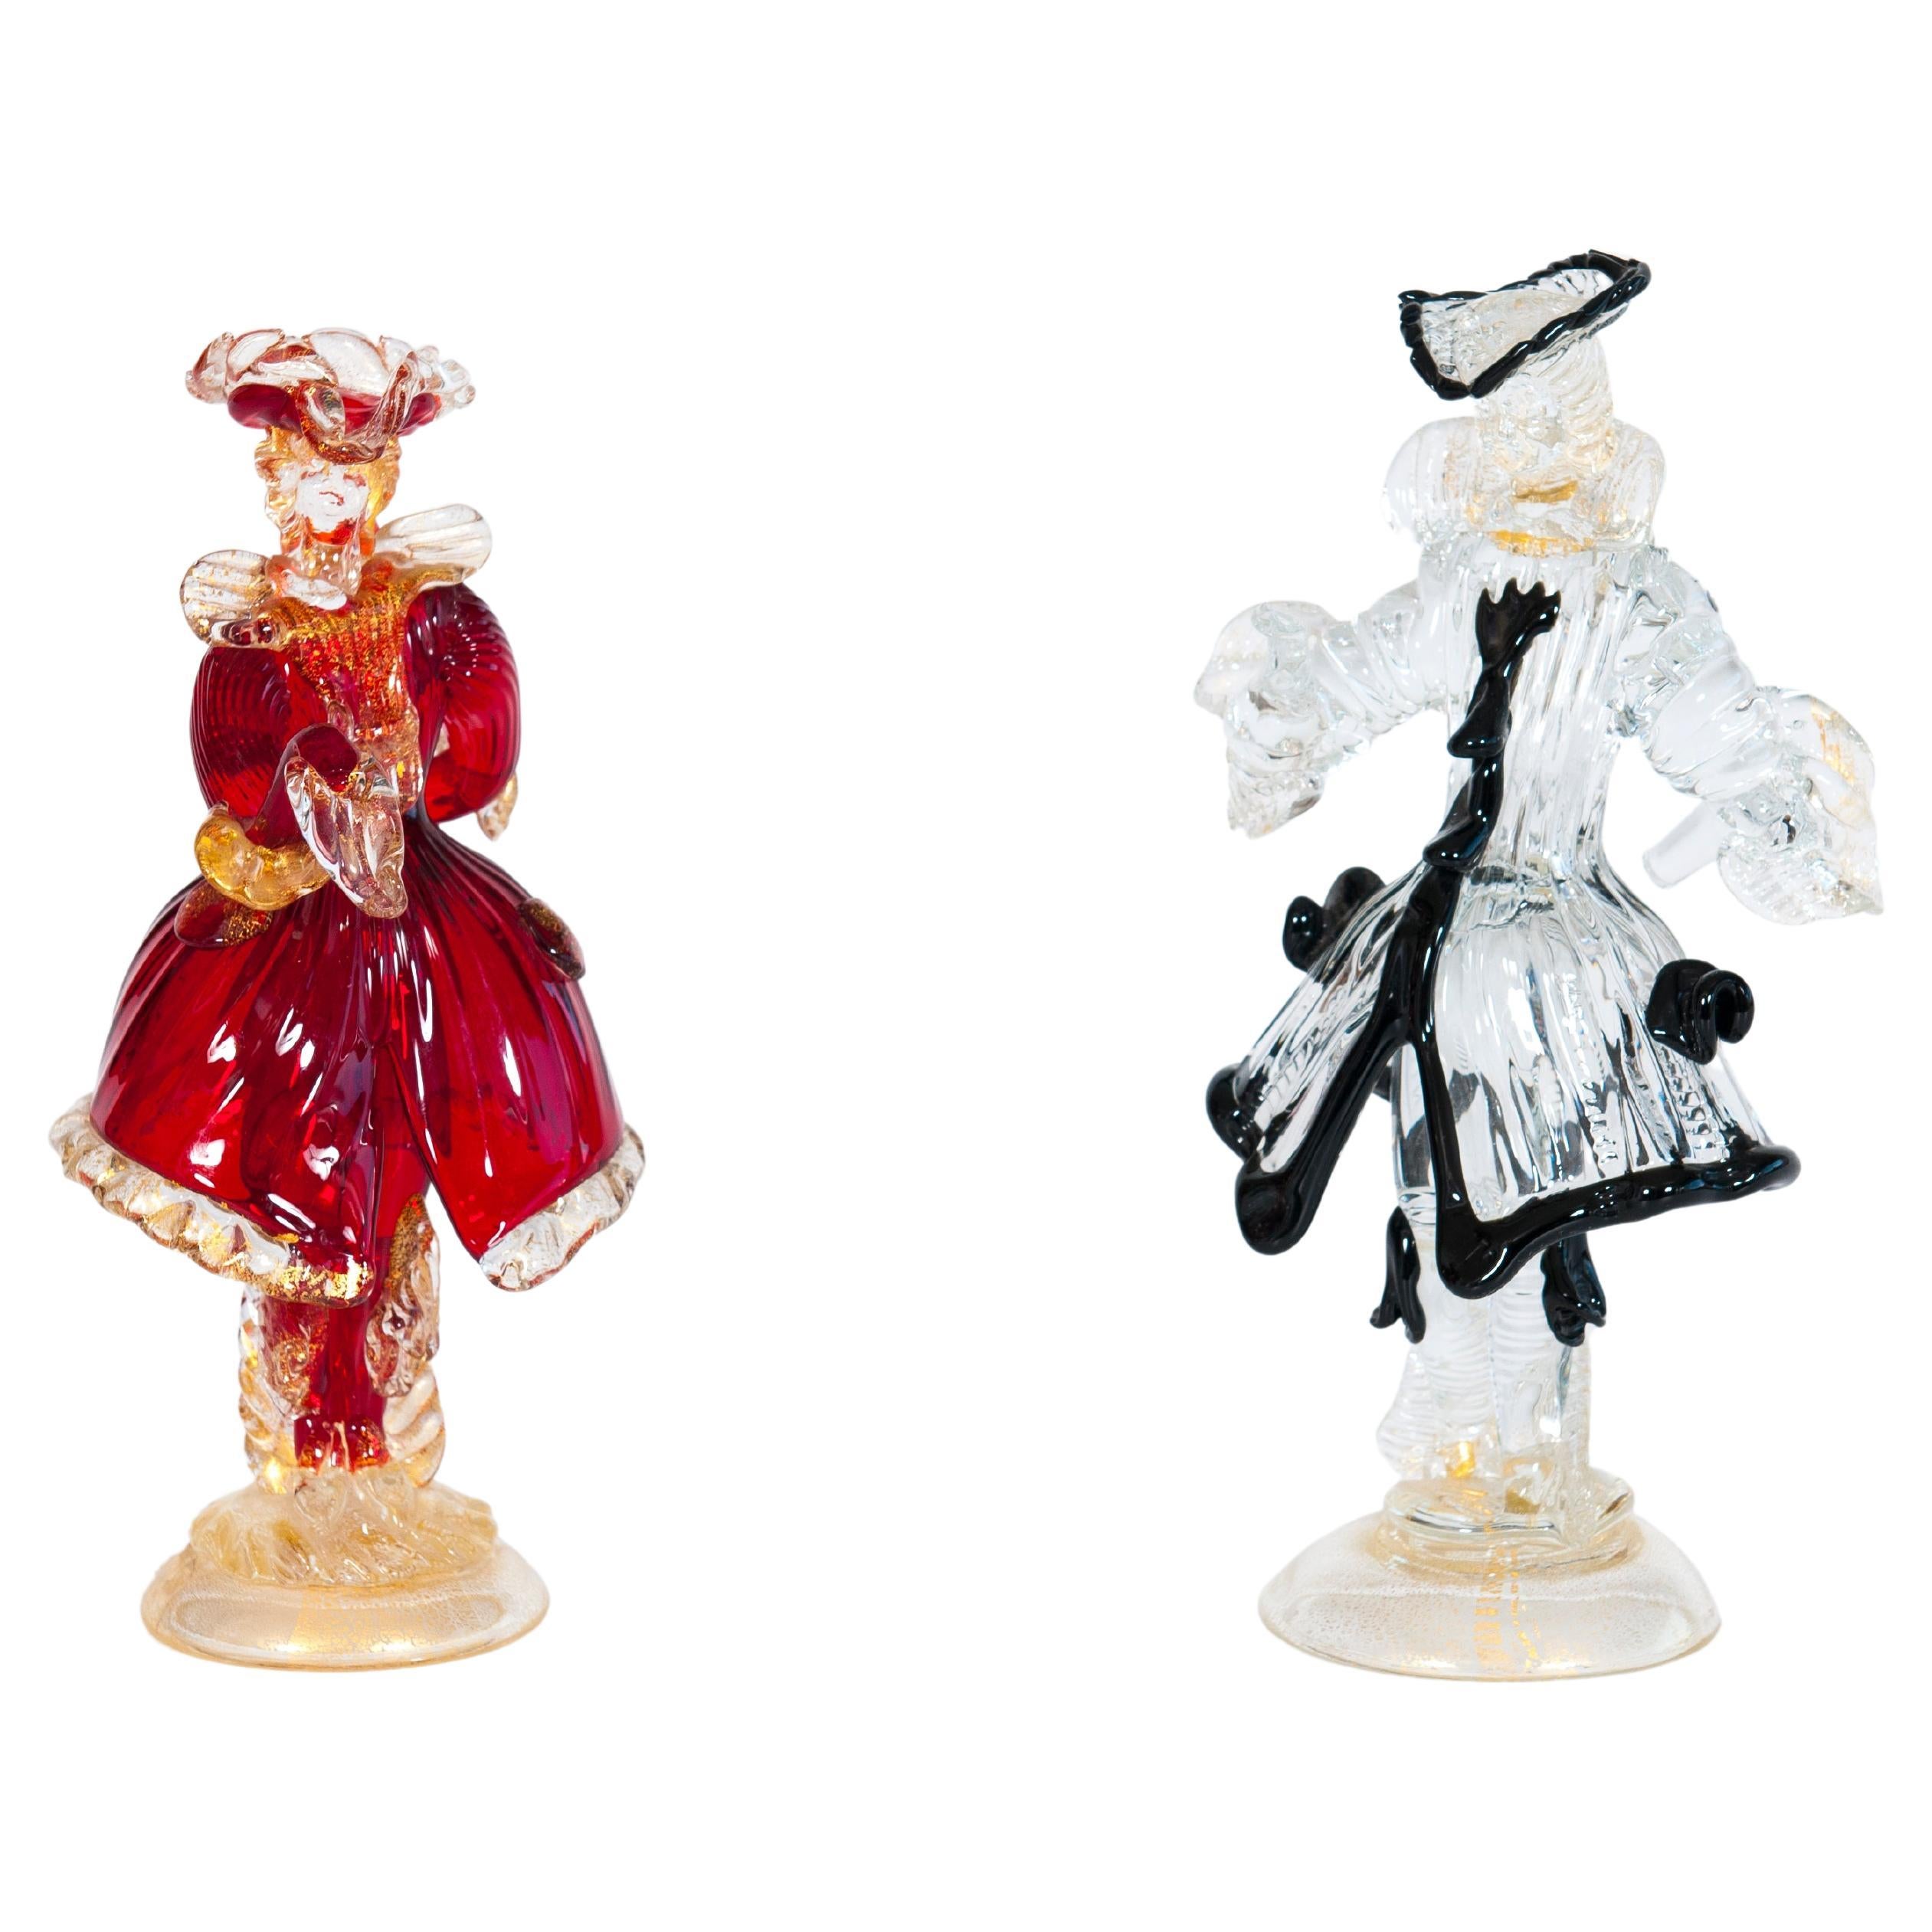 Beautiful Venetian Lady and Gentleman in Ruby-Red and Black, with Gold Finishes